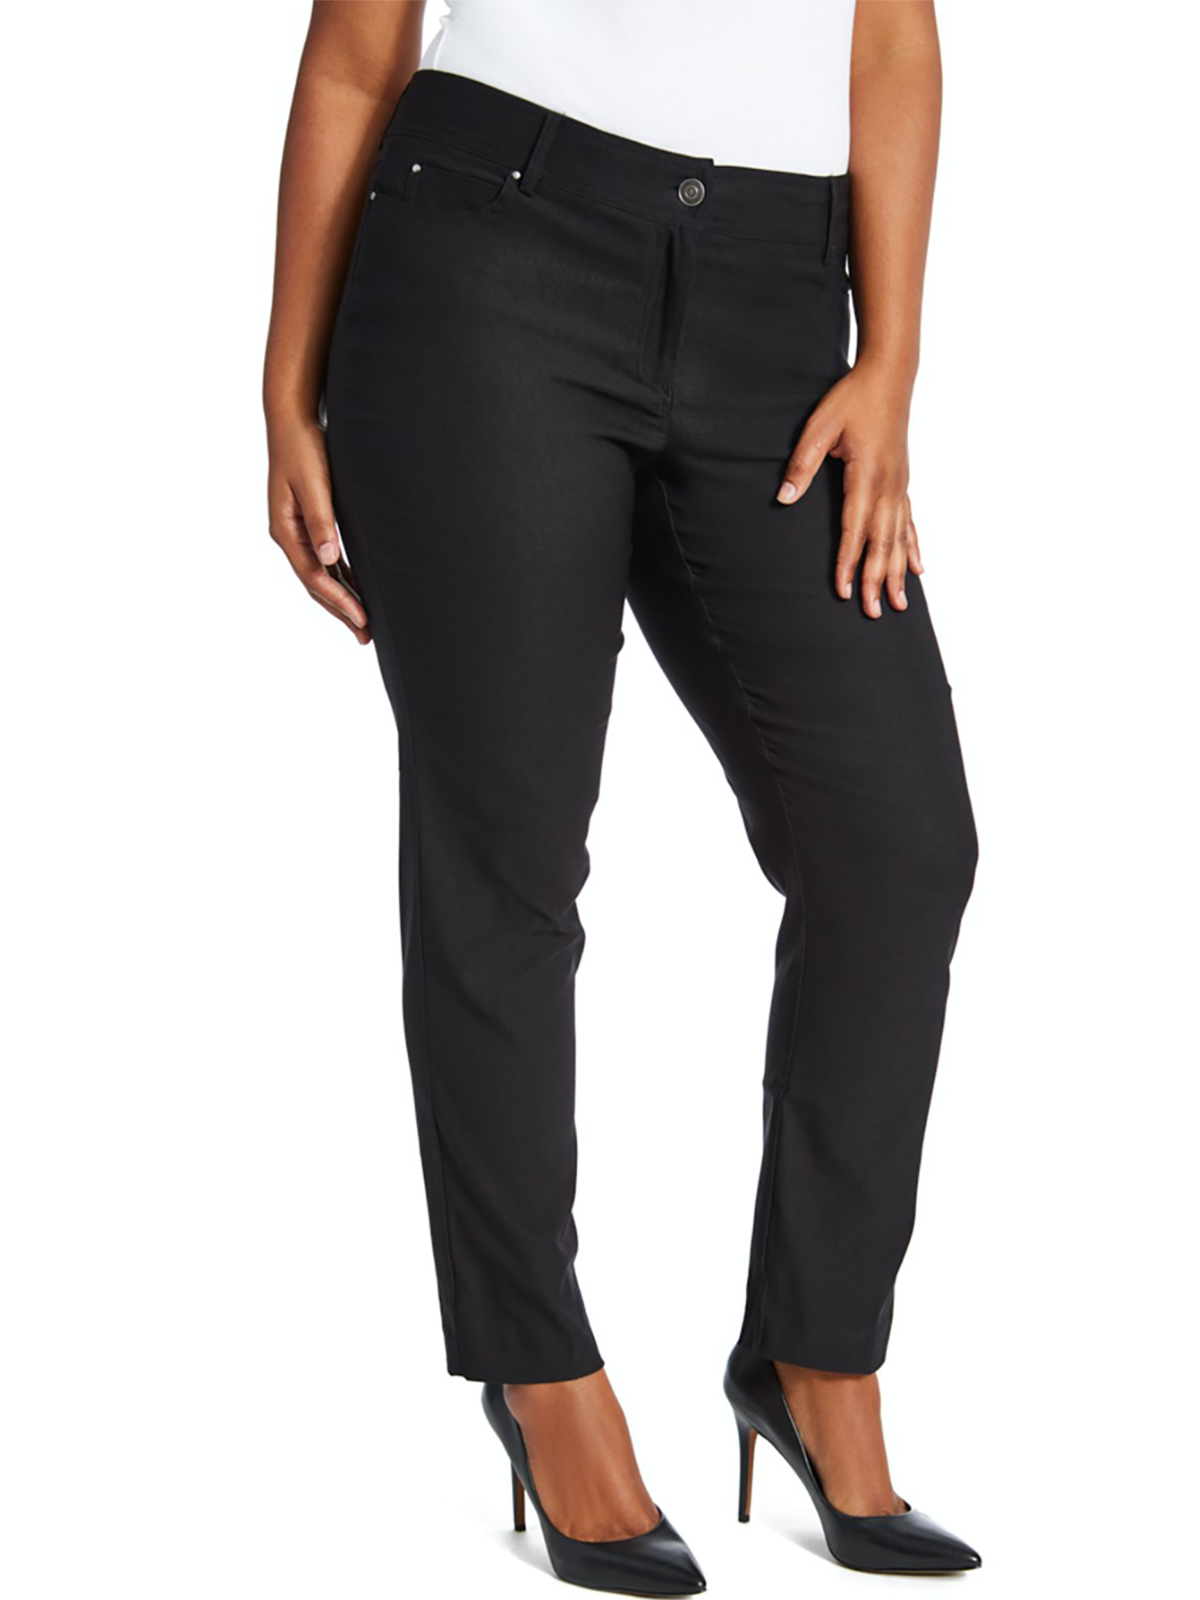 89th + Madison Luxe Ponte Five Pocket Stretch Straight Leg Pants